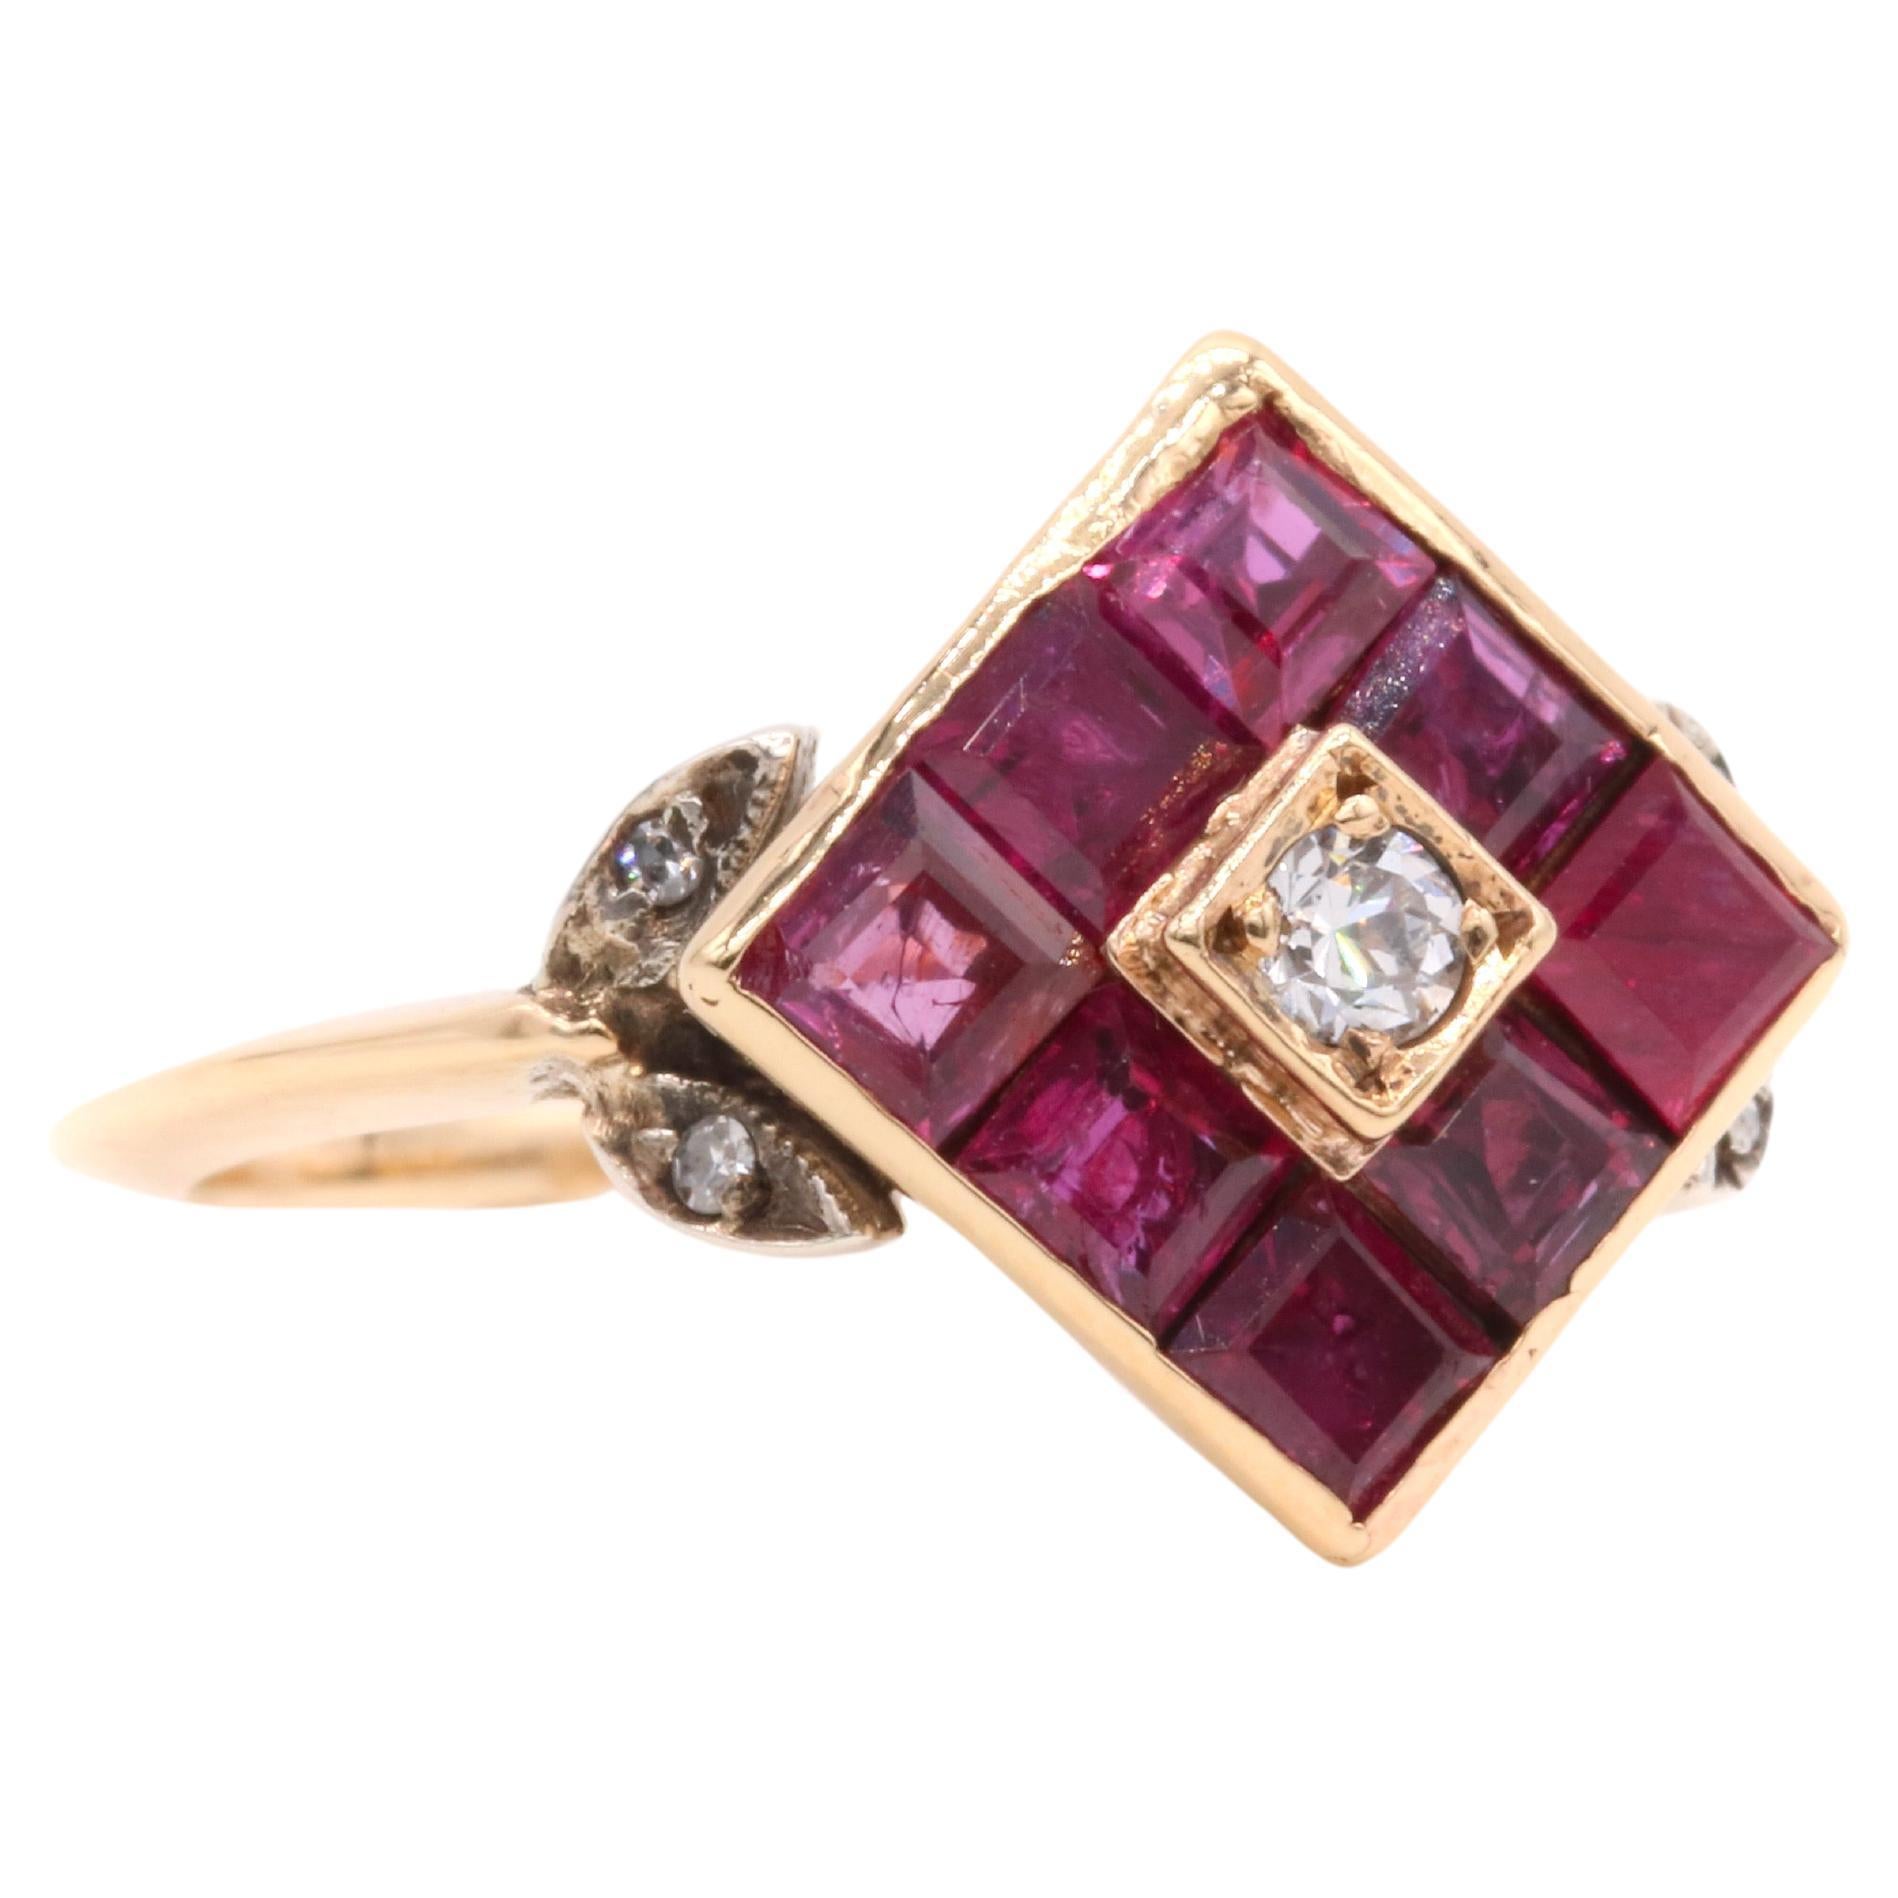 Vintage 18K Yellow Gold Diamond and Square Cut Ruby Cluster Ring